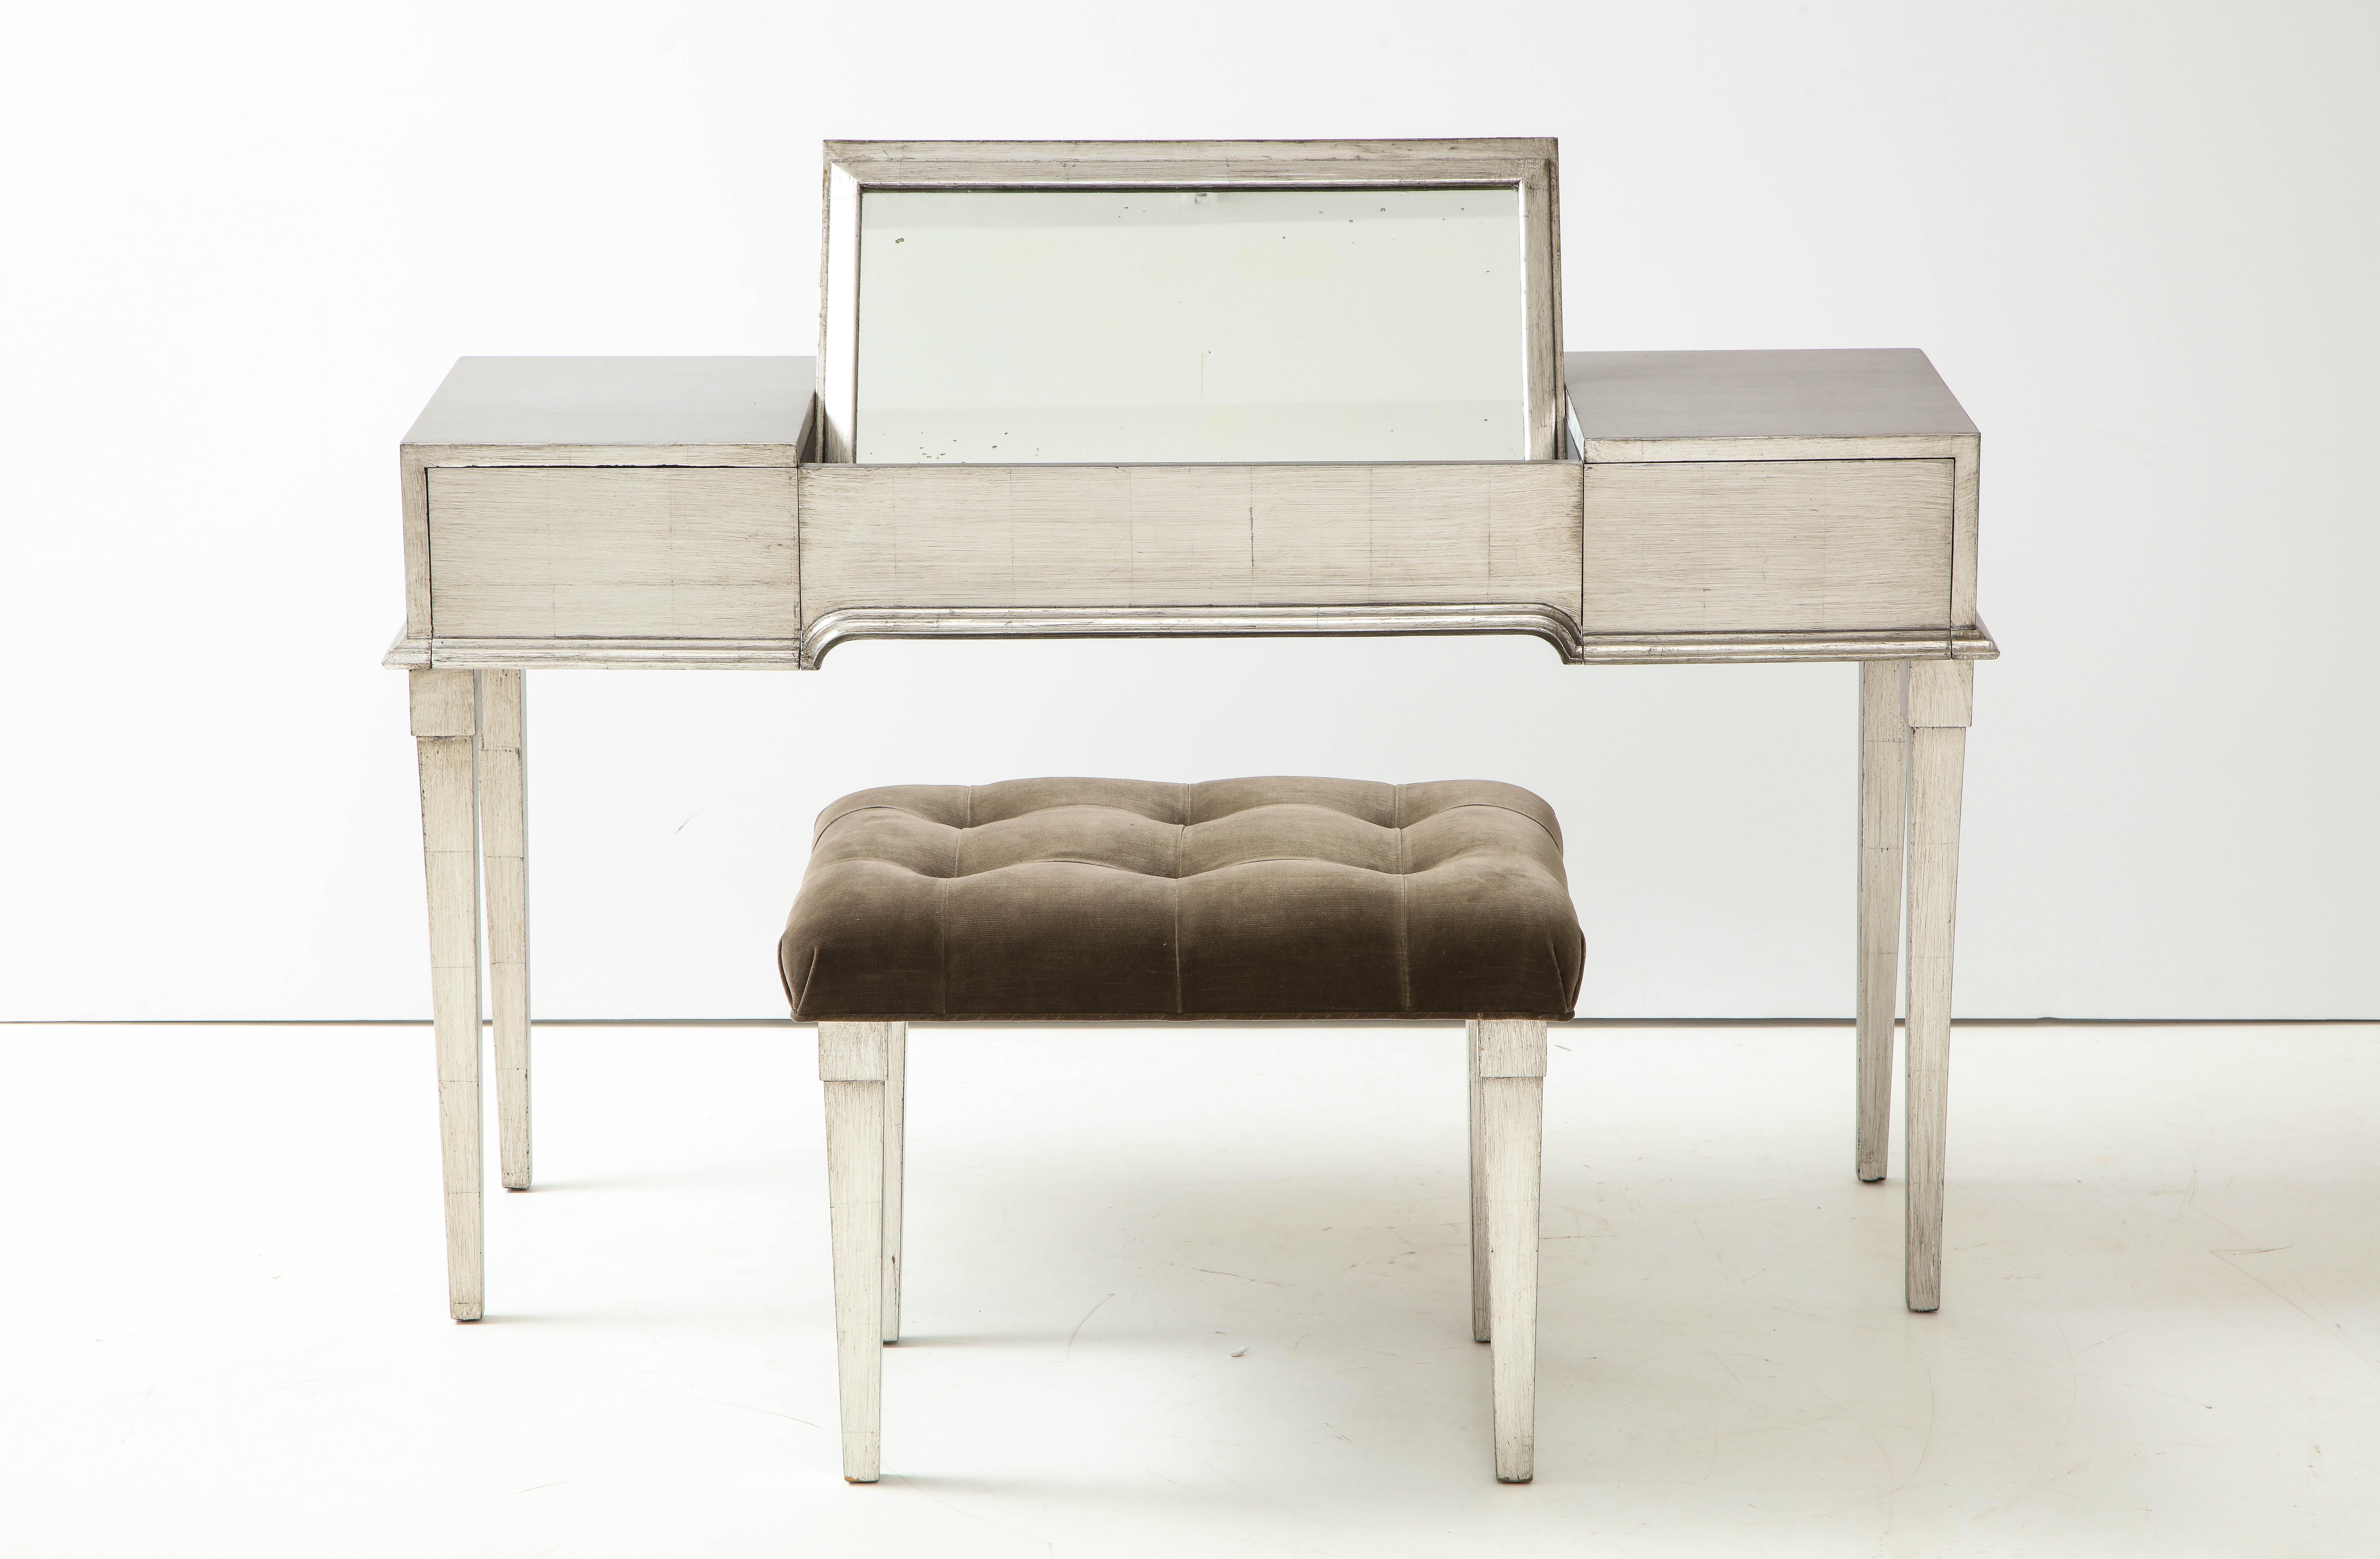 Elegant glazed silver leafed vanity / desk by James Mont.
The vanity has been newly restored with a glazed silver leaf finish and the bench has been
newly reupholstered in a taupe / brown velvet fabric.